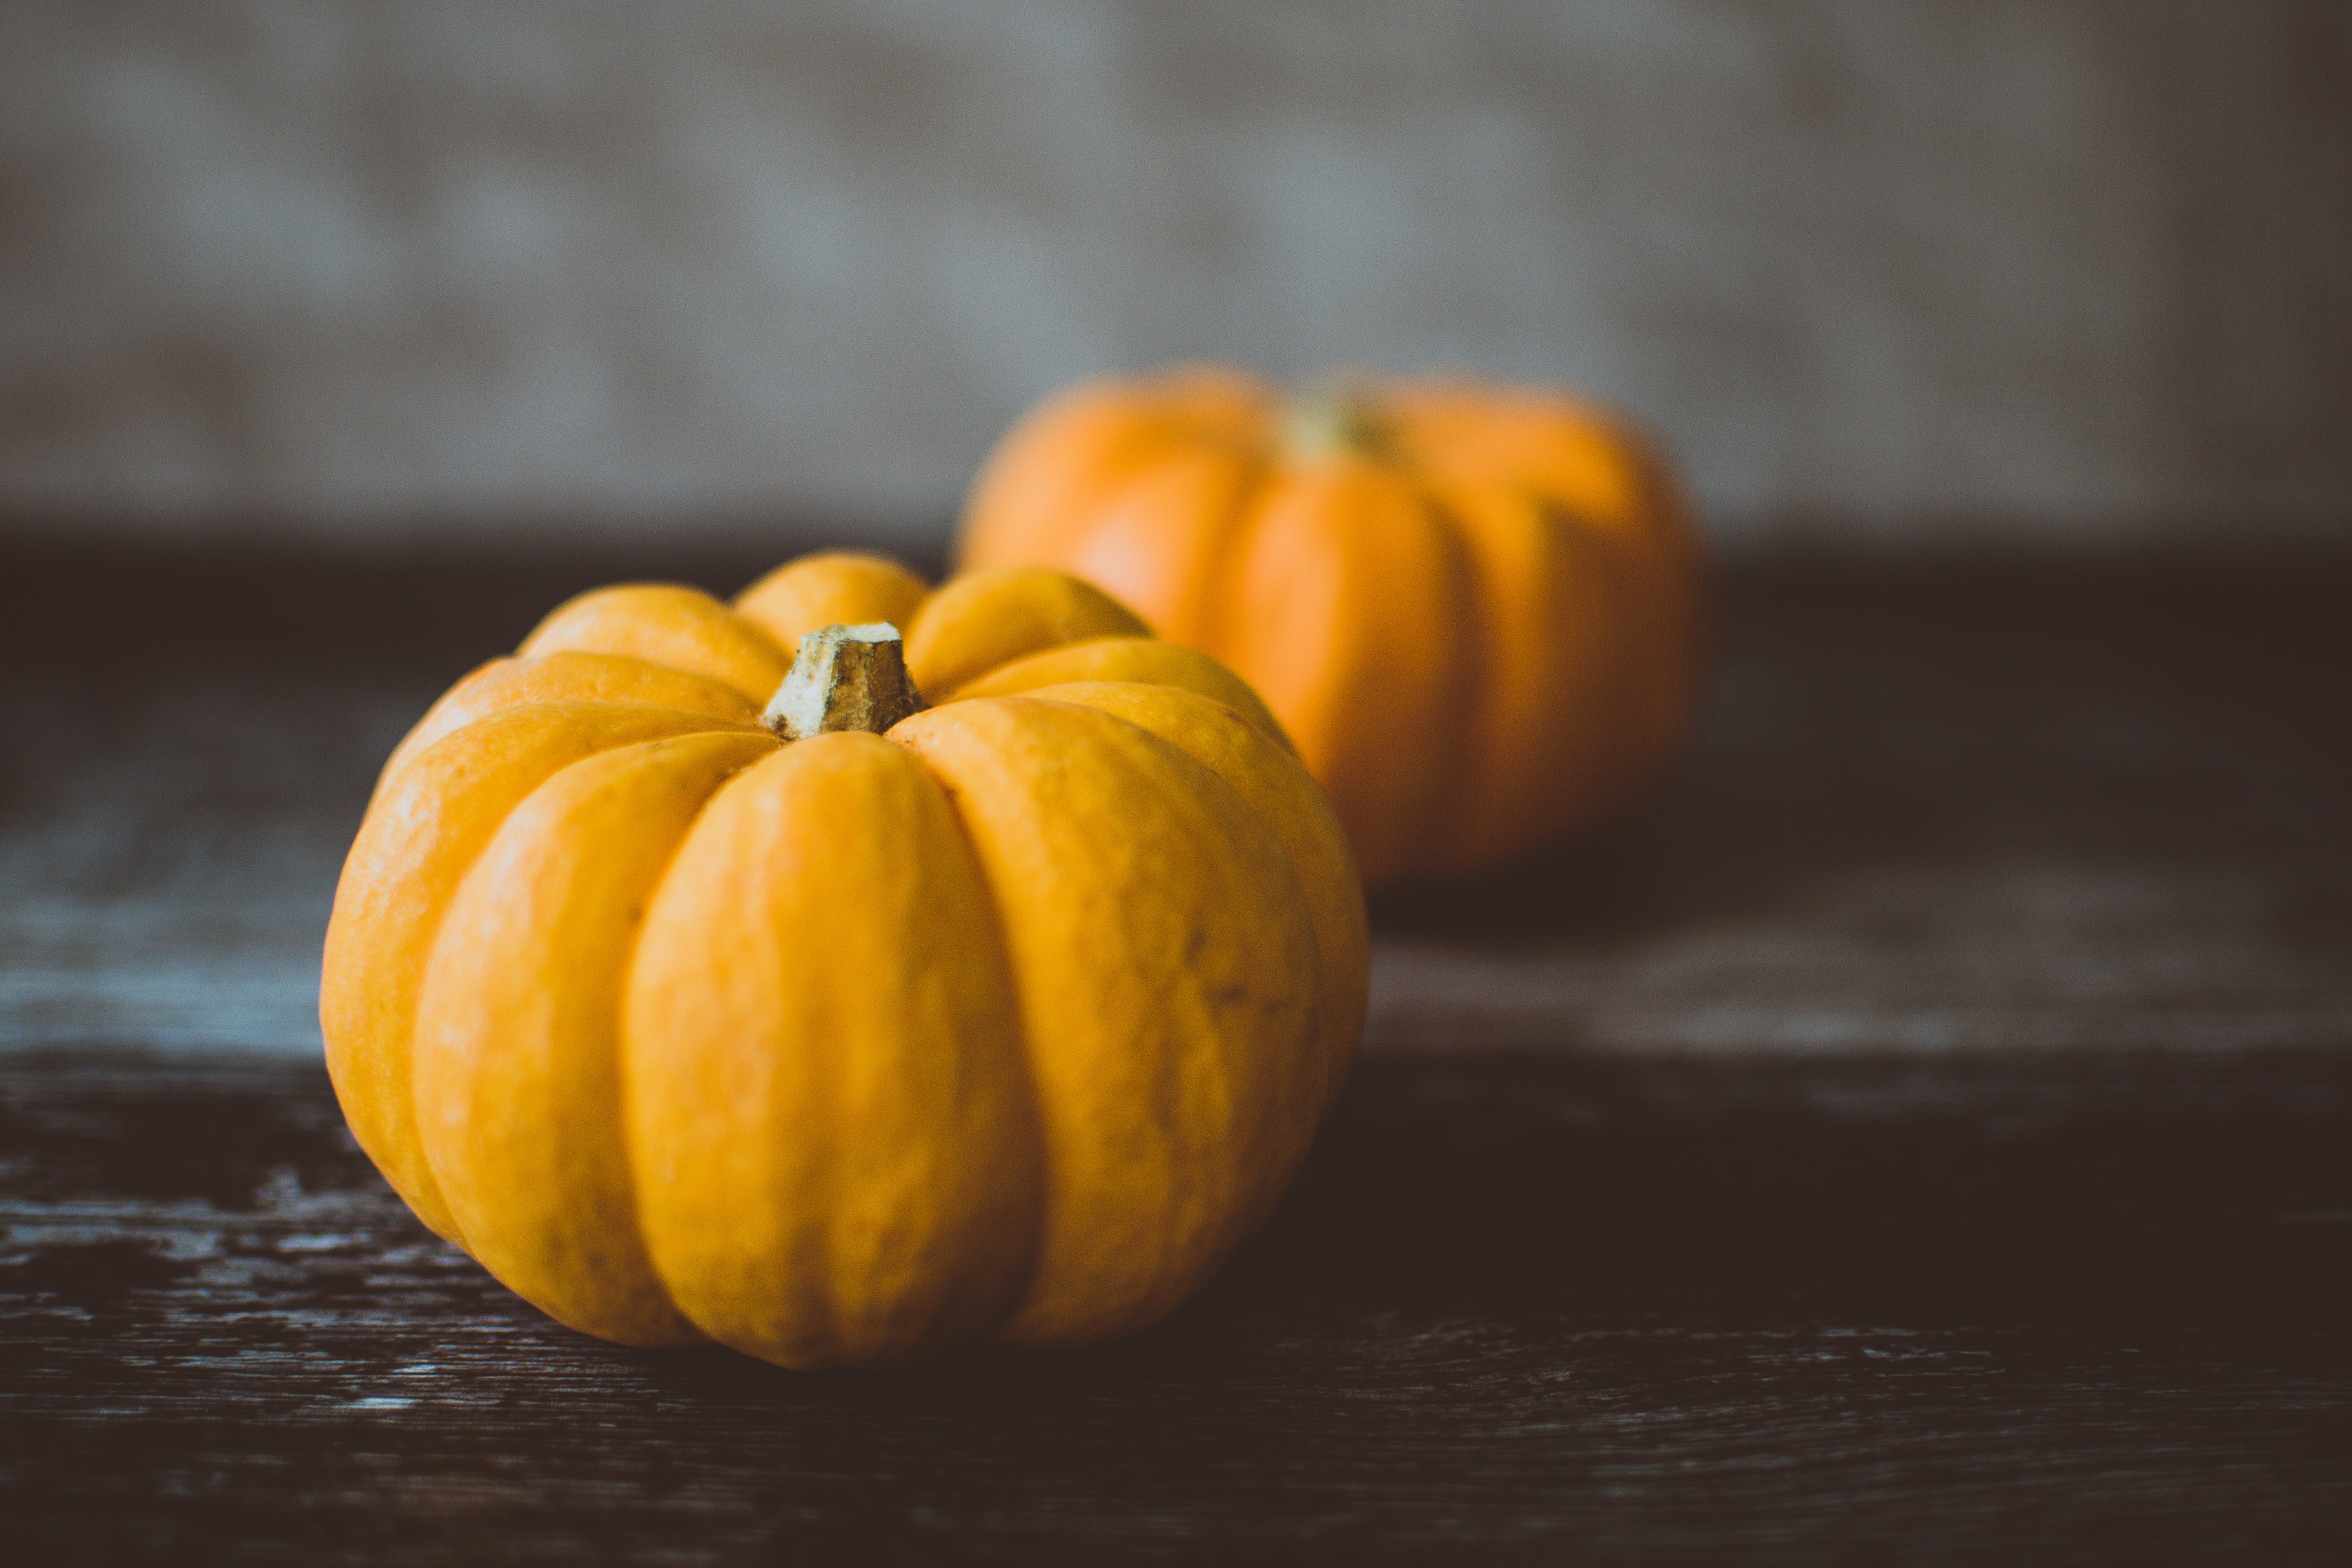 Two yellow pumpkins on a wooden table